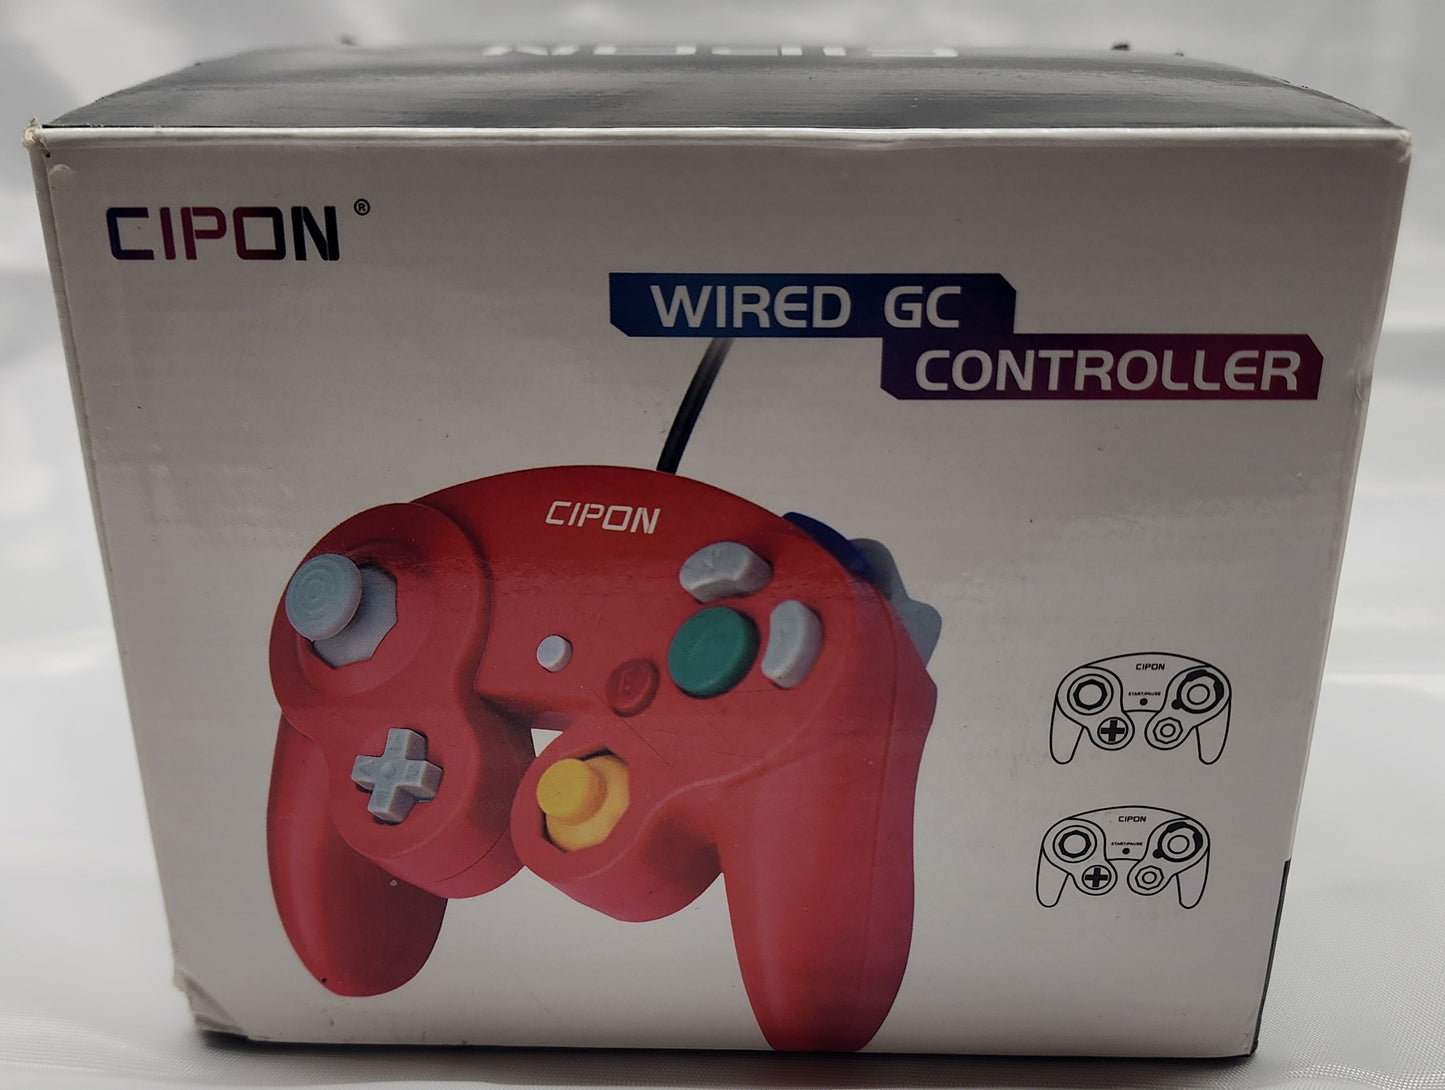 CIPON Wired GC Controller. 2 Pack.